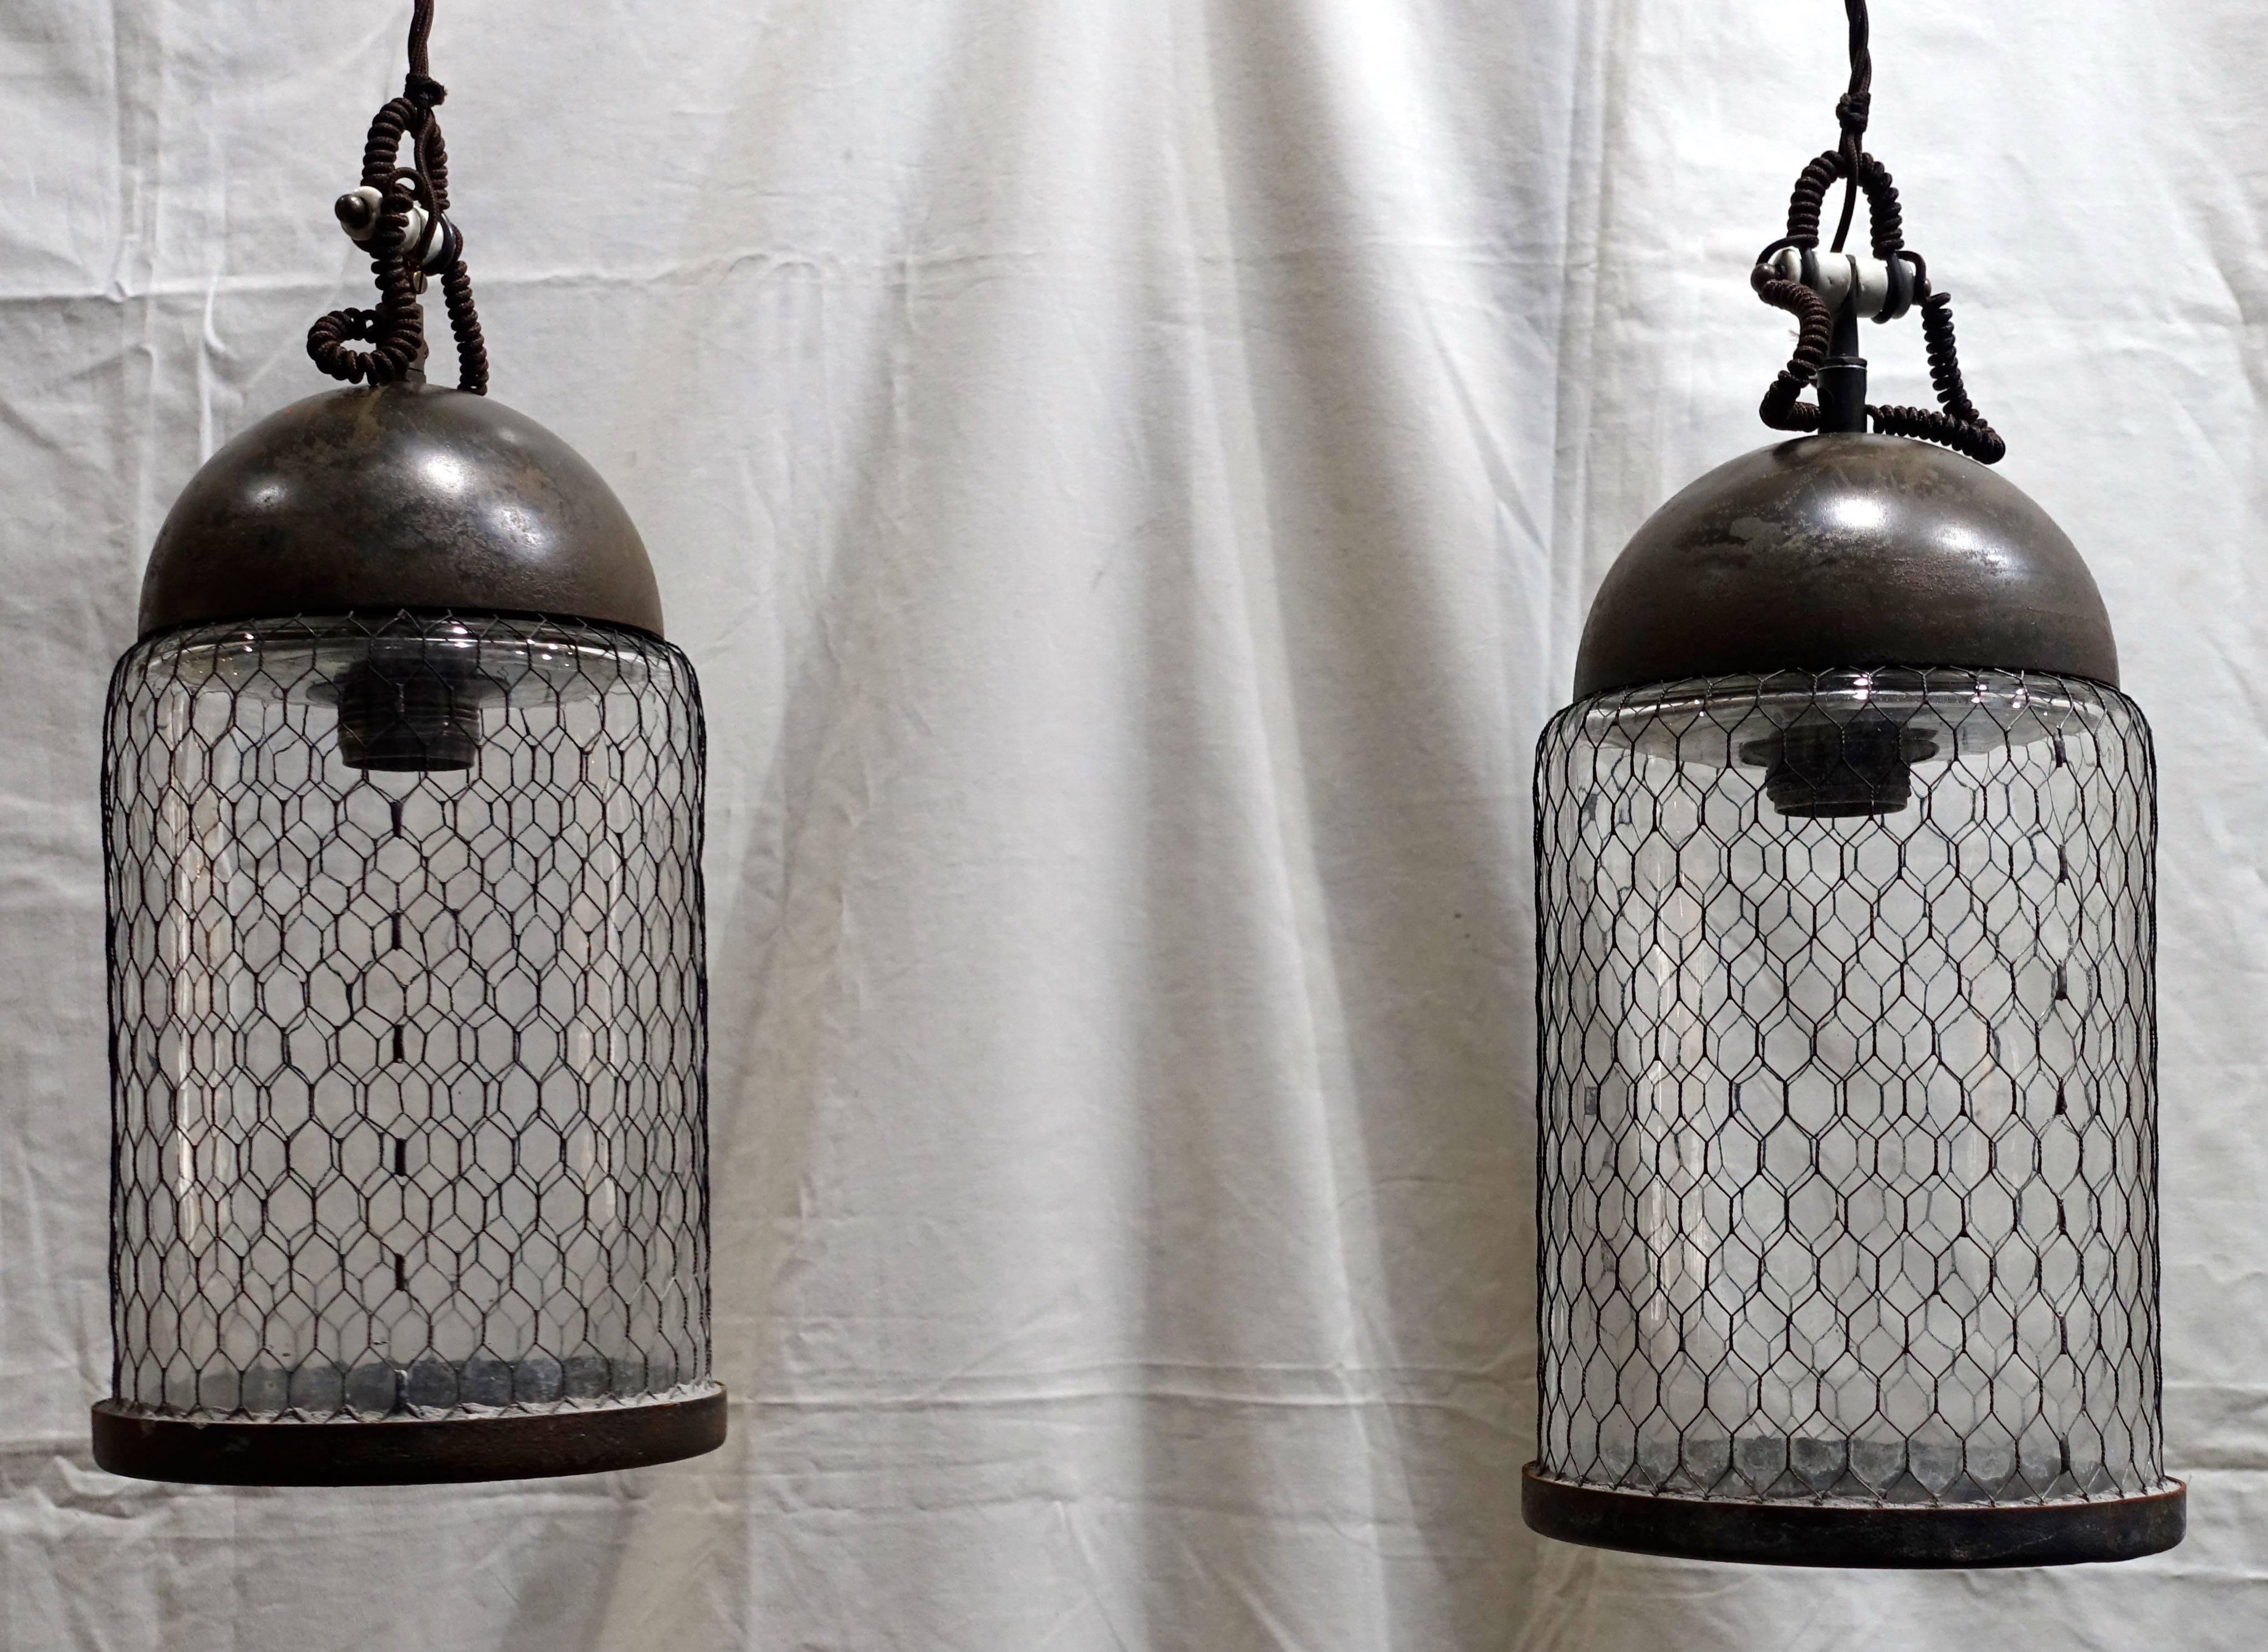 Contemporary Italian pair of elongated brushed pendant lights with cage around glass.
Brushed metal dome.
